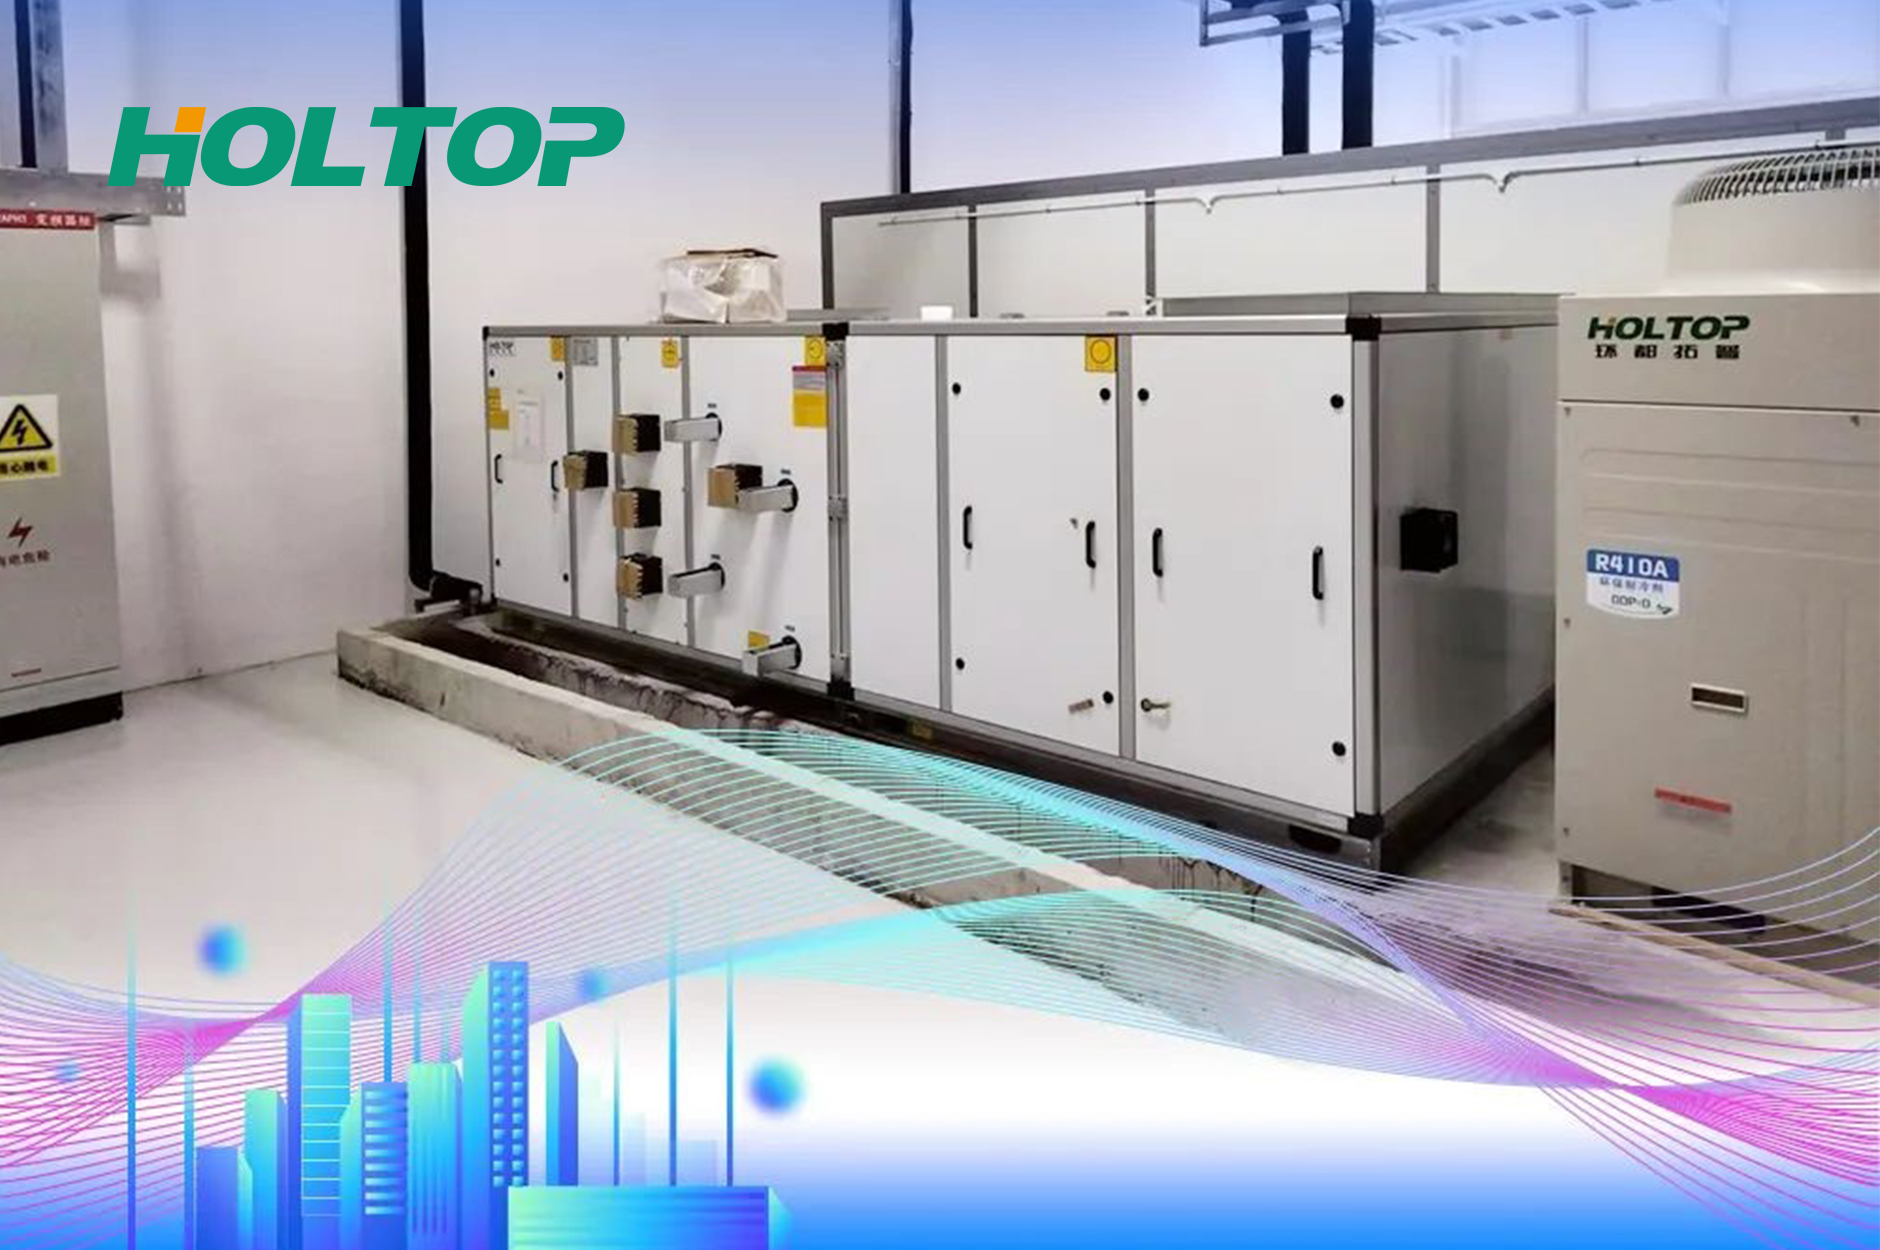 Holtop Air Conditioning Systems Empower Hangzhou Qiantang Smart City